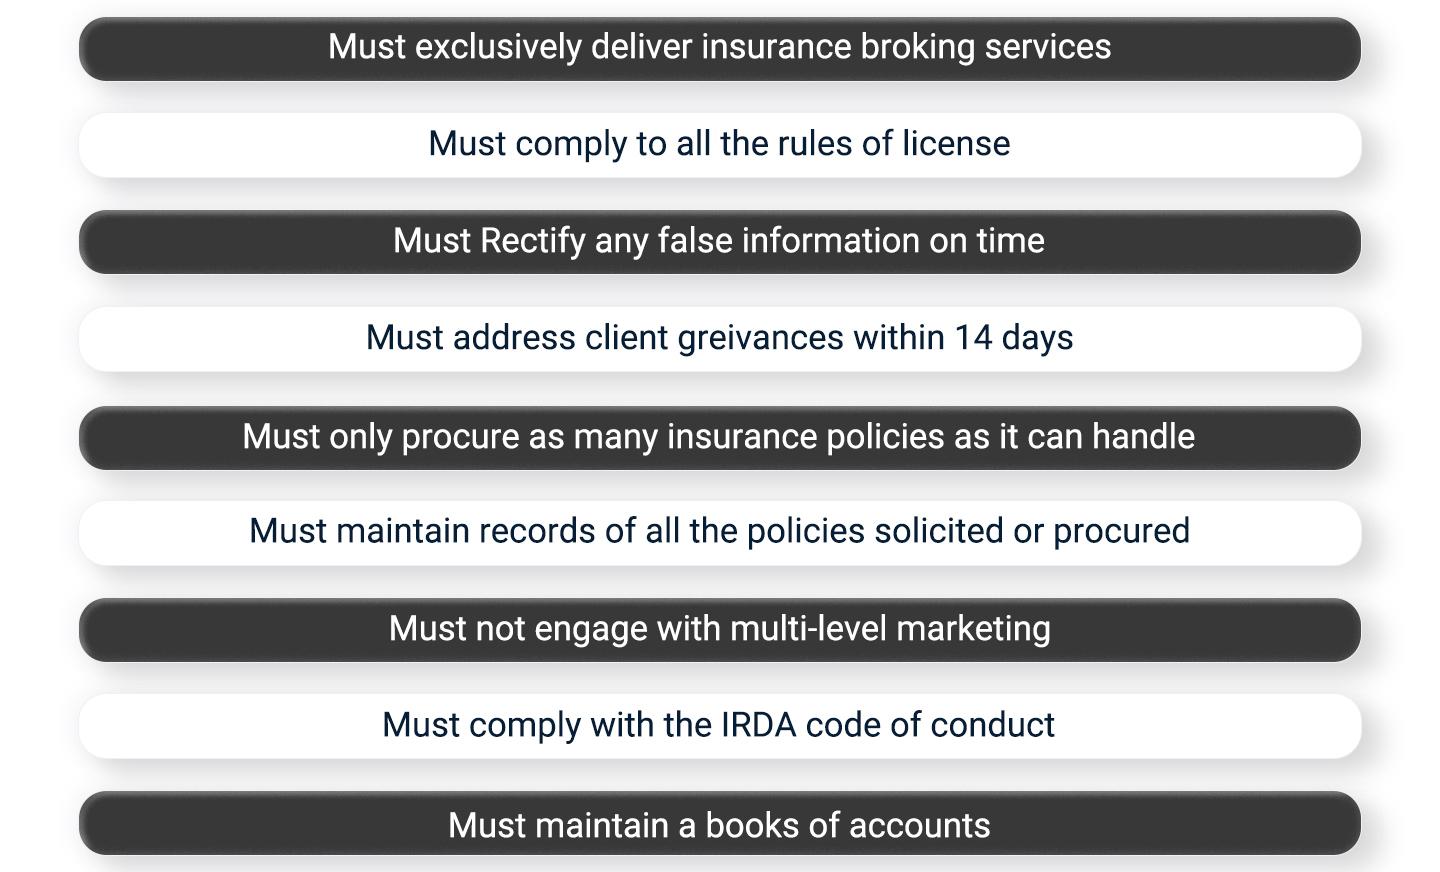 Rules for grant of Insurance Broking License in India